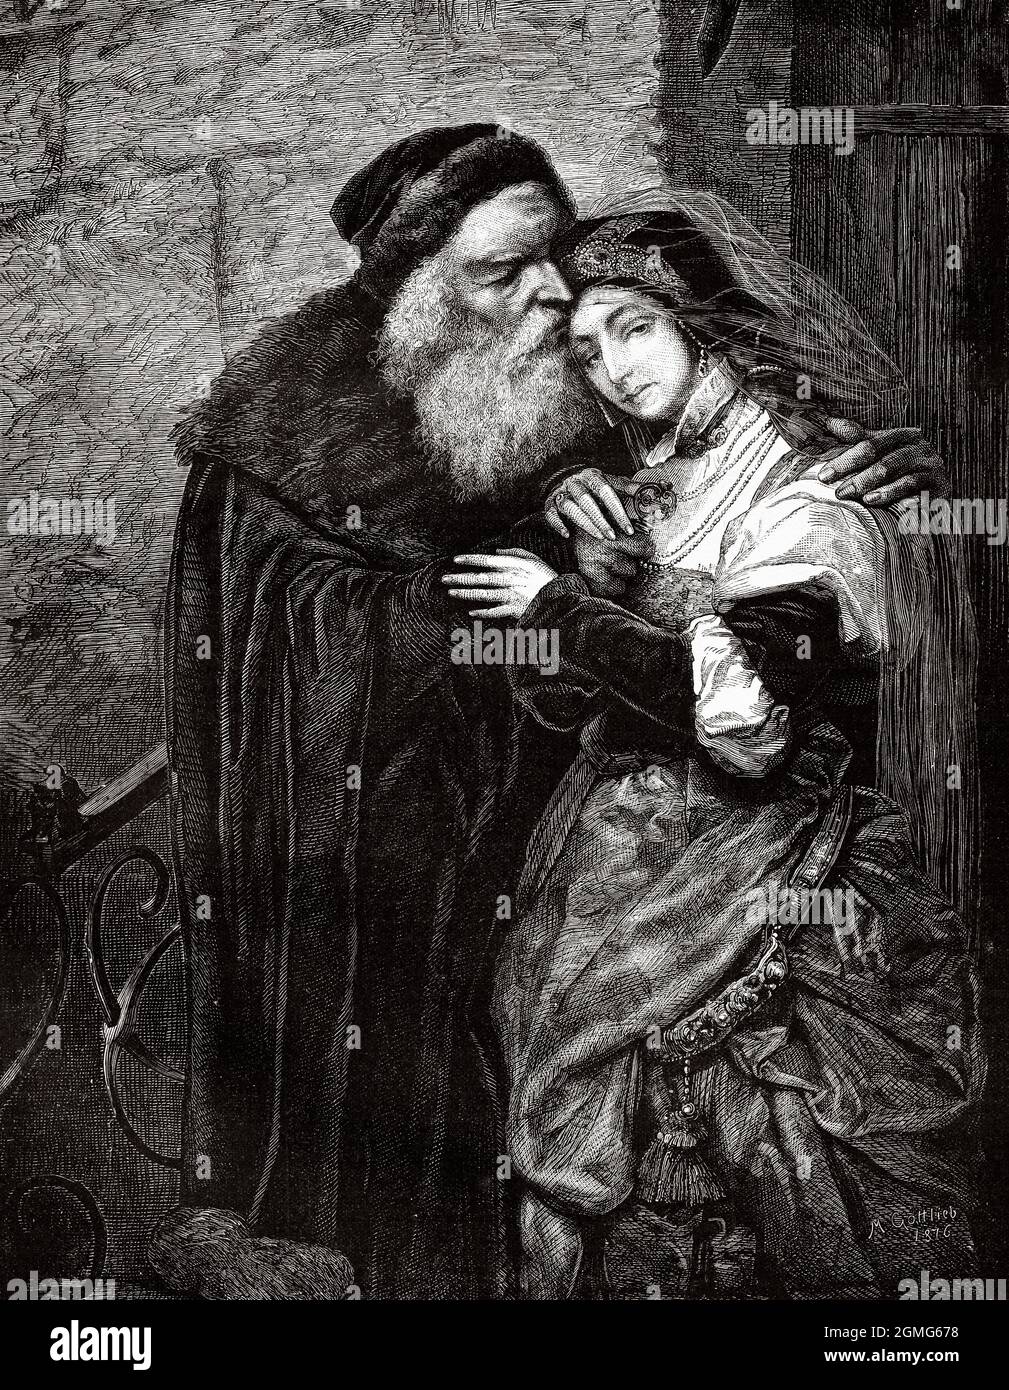 The daughter of the Jew, painting by Maurycy Gottlieb (1856-1879) was a prominent Polish Jewish painter. Old 19th century engraved illustration from La Ilustración Artística 1882 Stock Photo